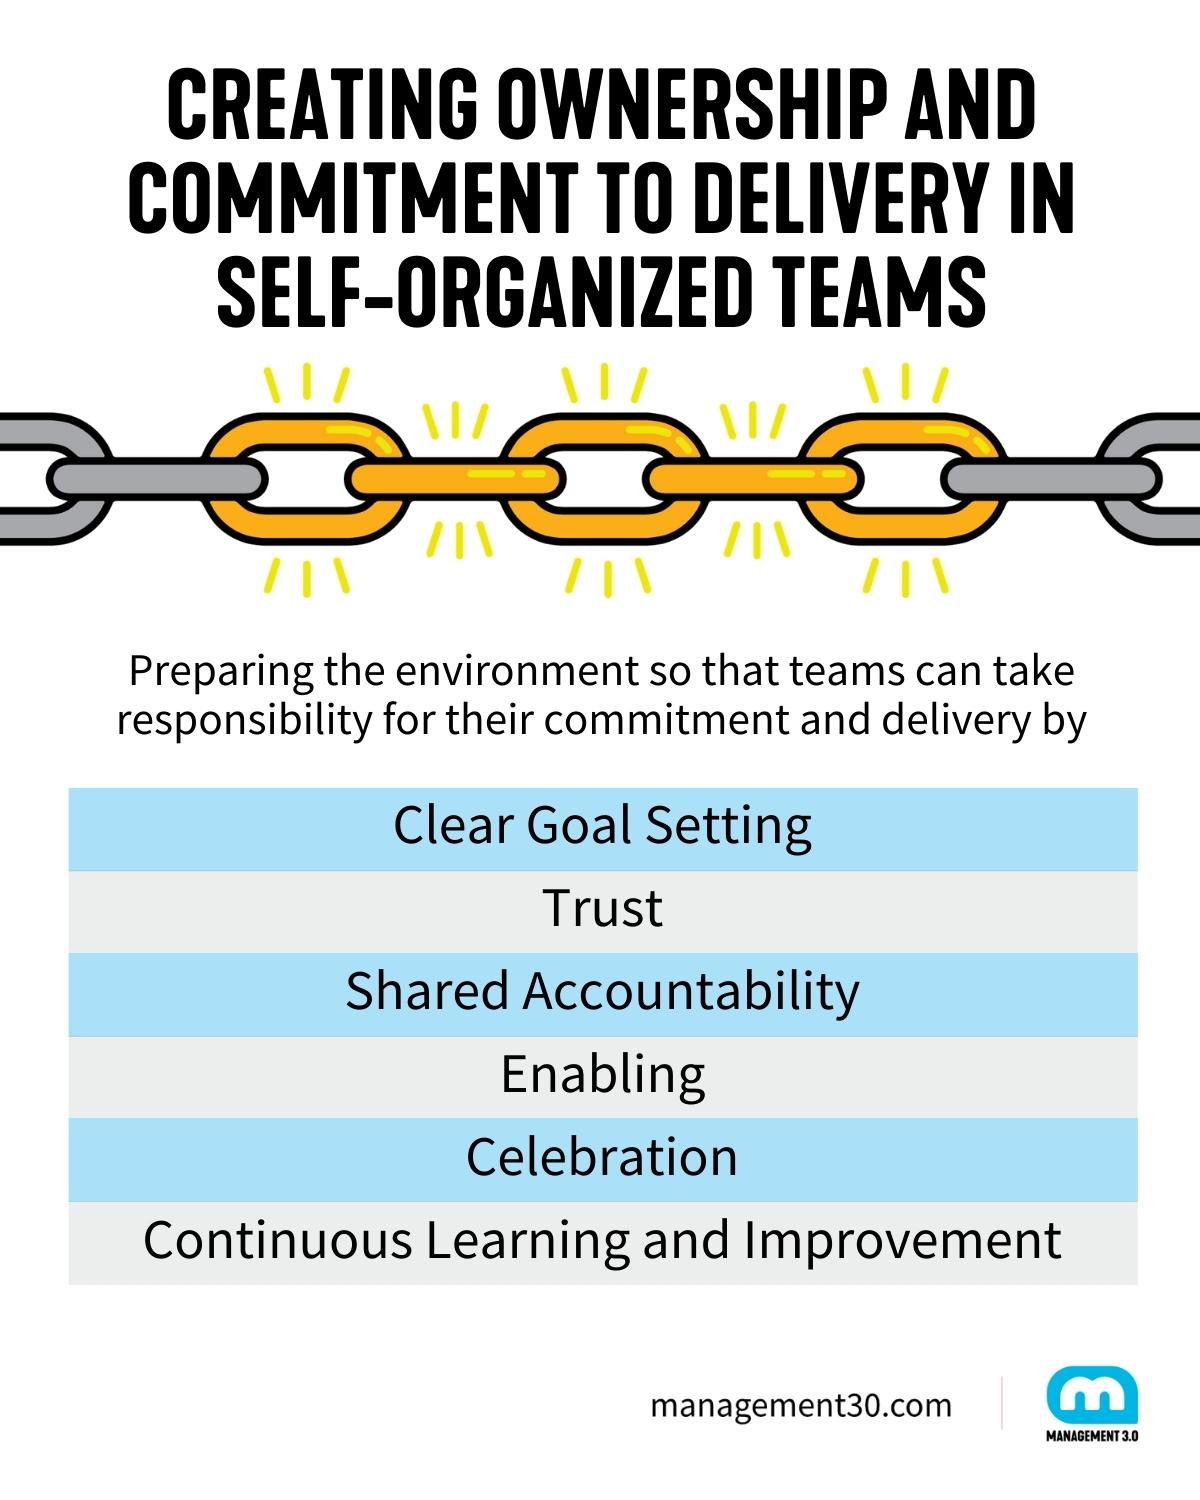 creating ownership and commitment to delivery in self-organized teams